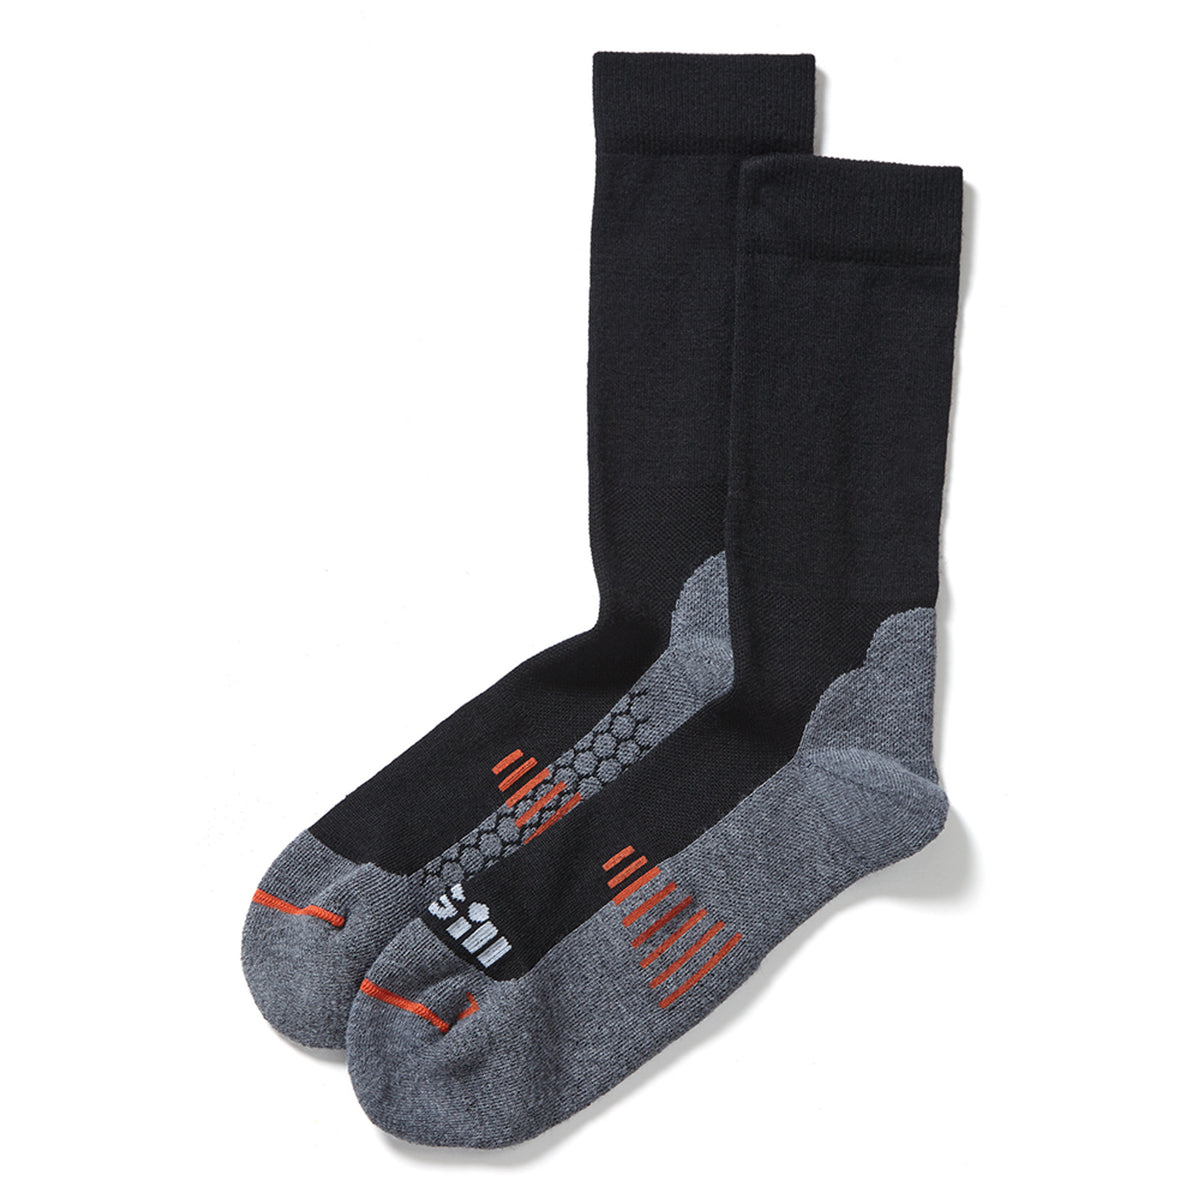 GILL Midweight Sock